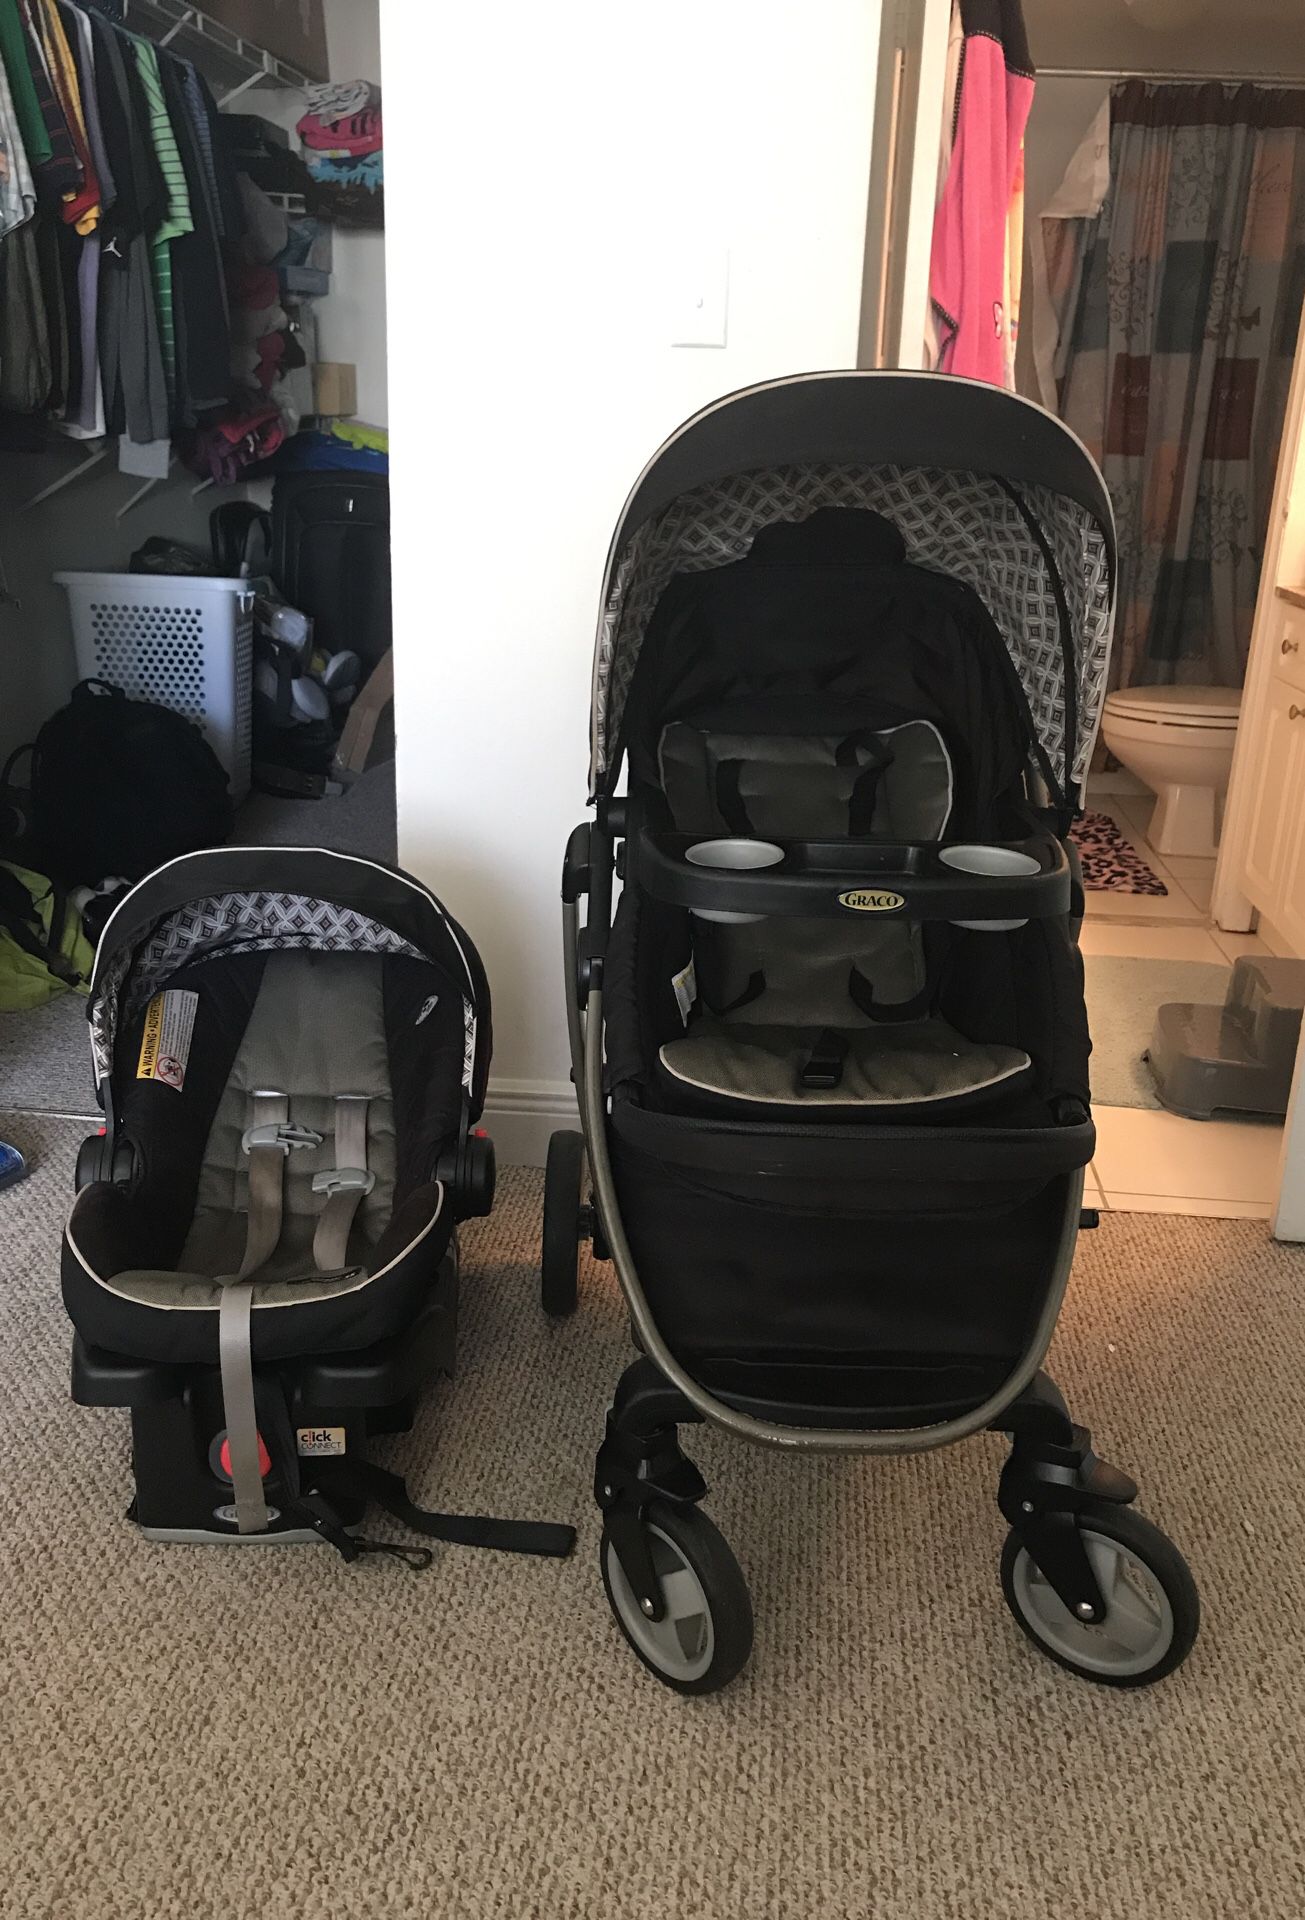 Graco click connect car seat w/ base and stroller. Good condition